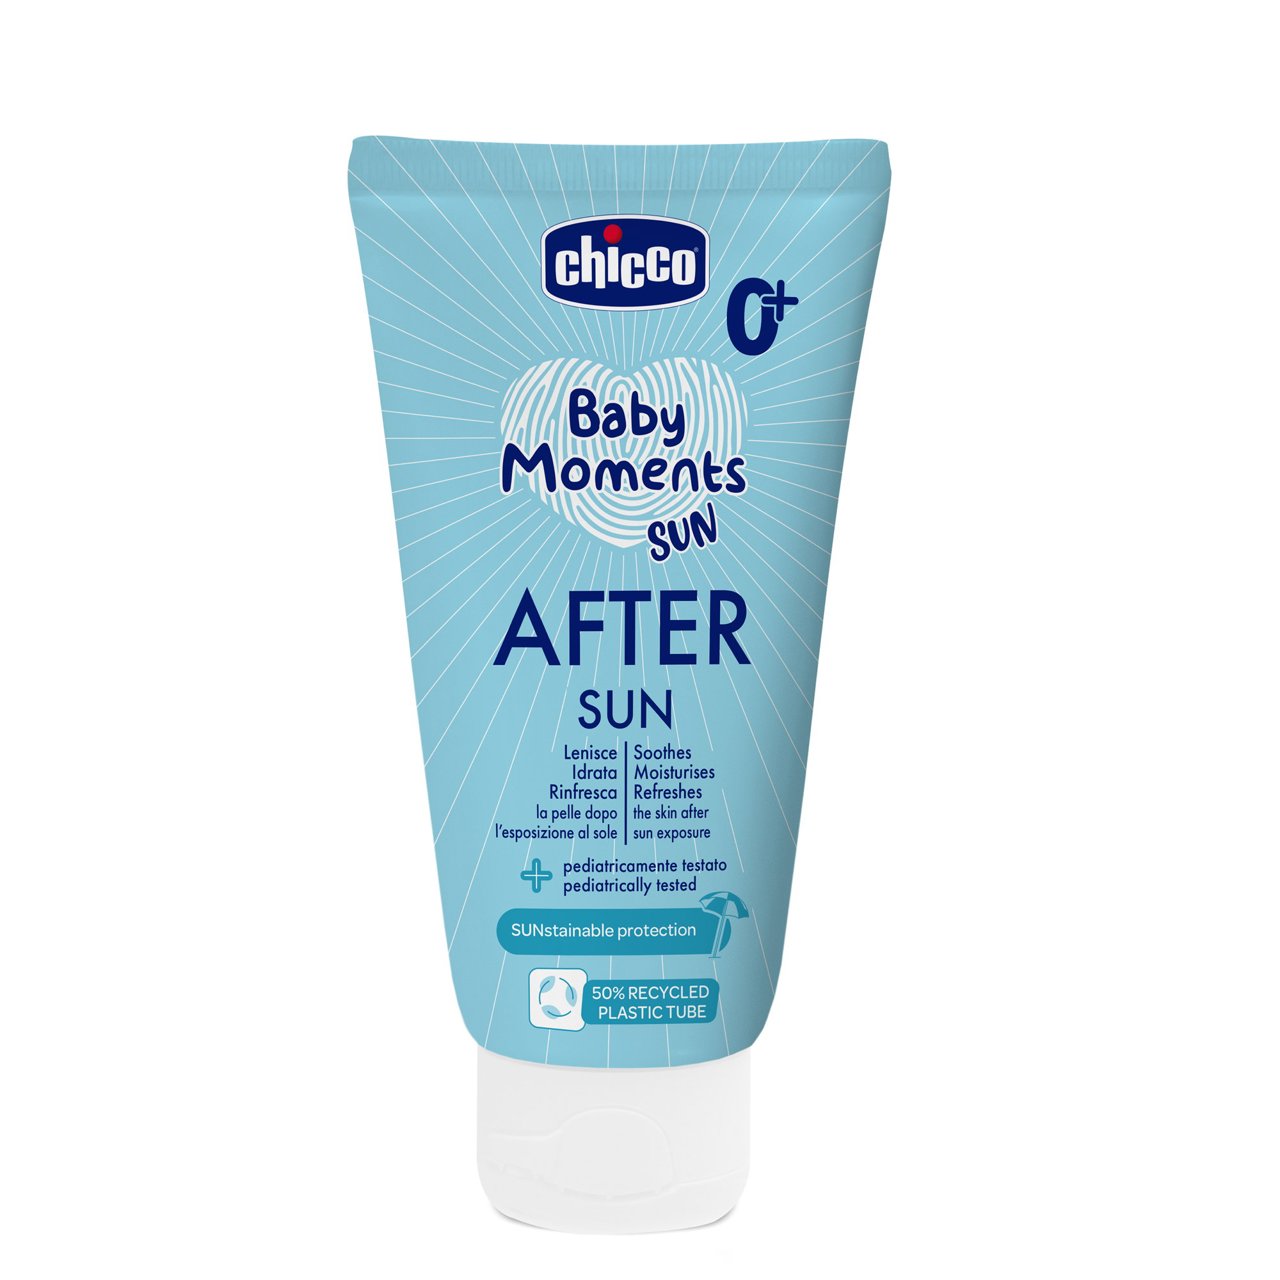 Leche corporal aftersun 150ml Chicco - 0